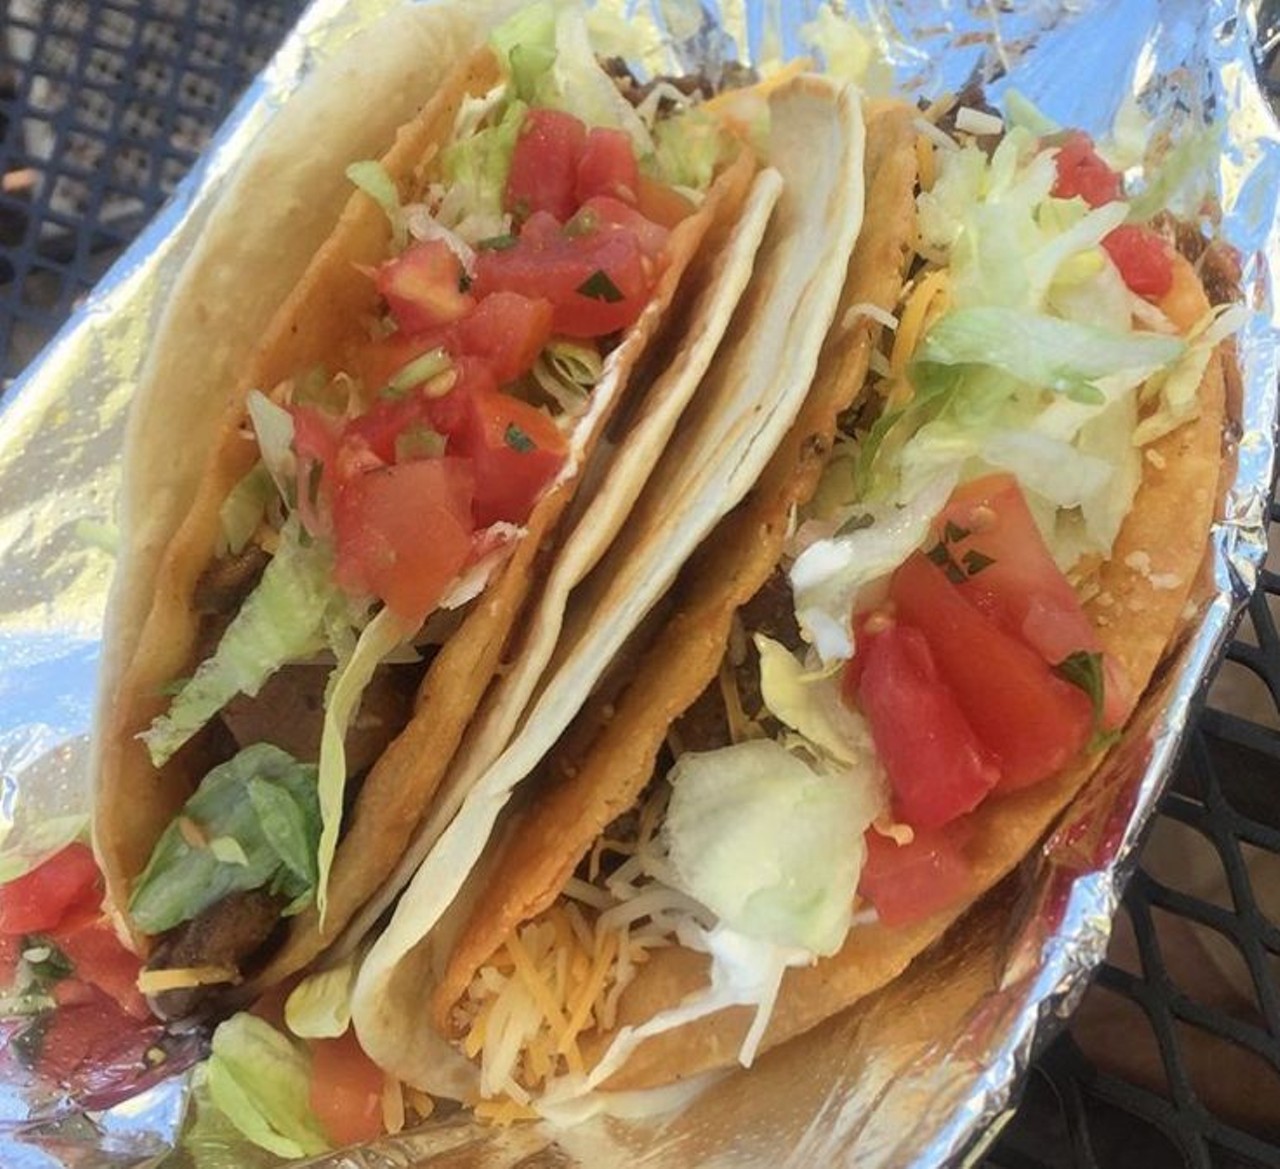 A Double D from Gringos Locos
multiple locations 
There's no turning back for taco lovers once they've had a double decker taco: tortilla-wrapped crunchy shell tacos held together by a queso spread.
Photo via madeinorlando/Instagram